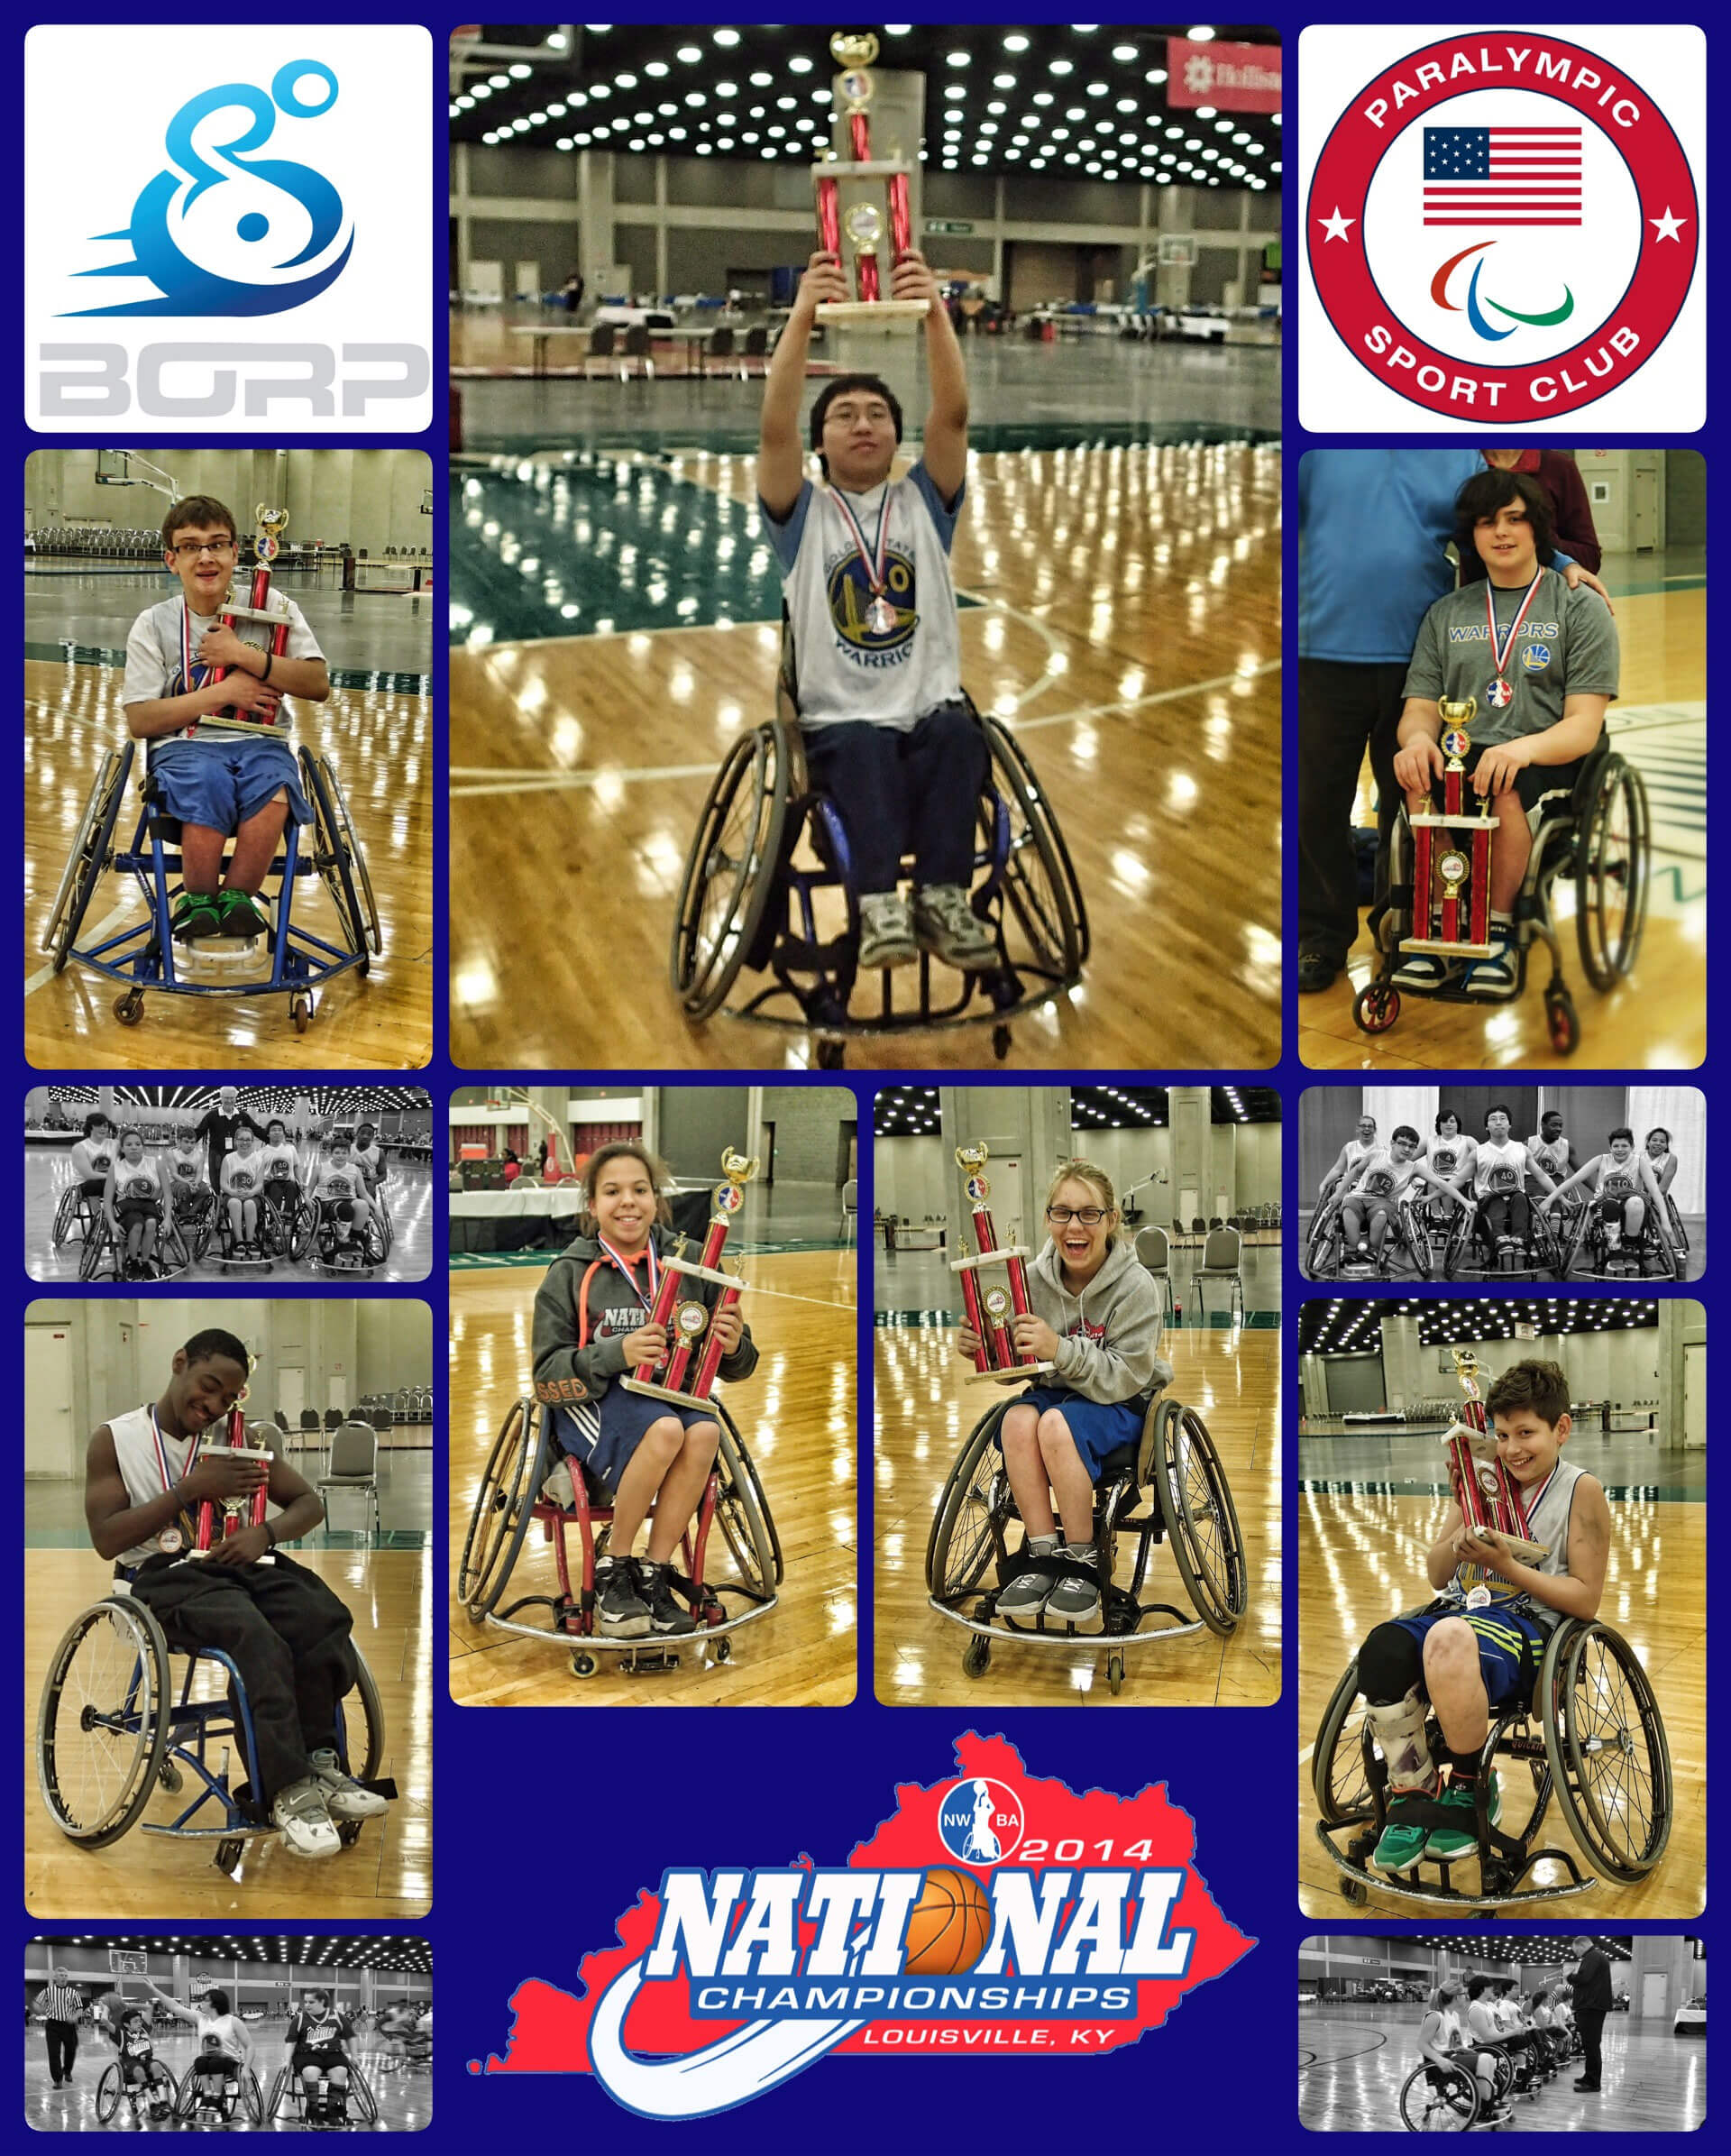 photo grid from the 2014 NWBA NAtional Championship Tournament